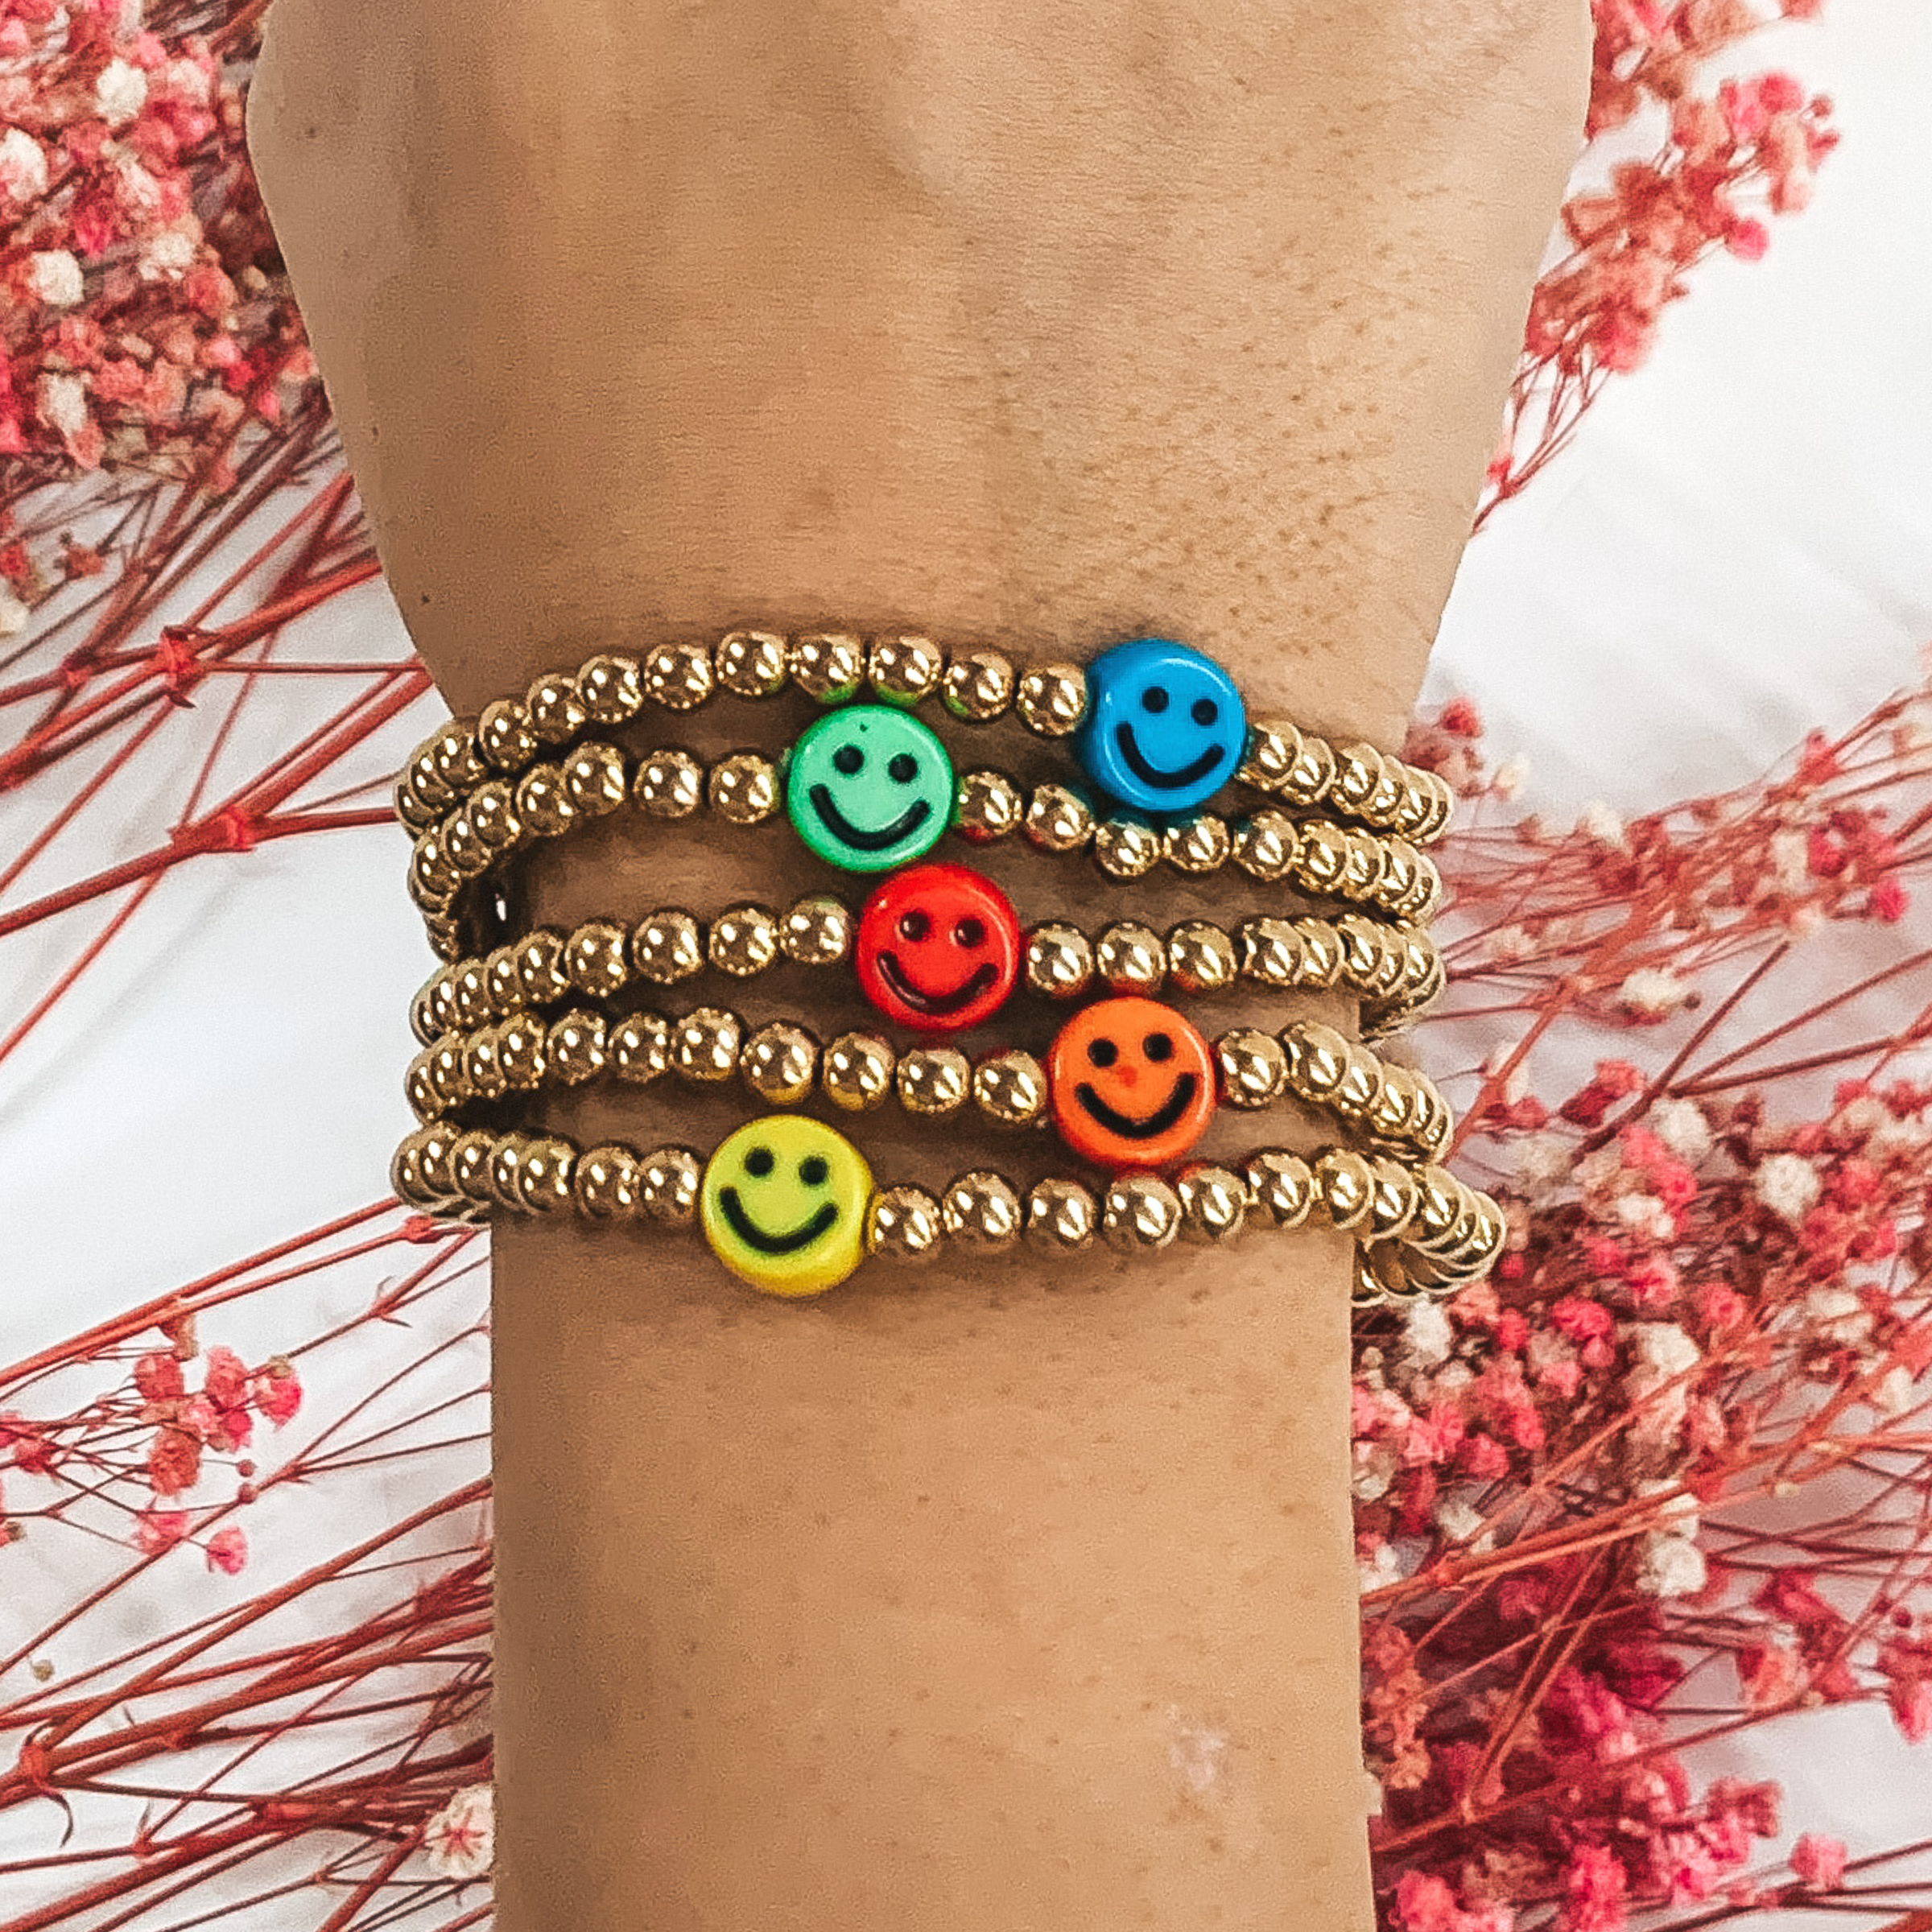 All Smiles Gold Beaded Bracelet Set with Happy Faces in Multicolored - Giddy Up Glamour Boutique